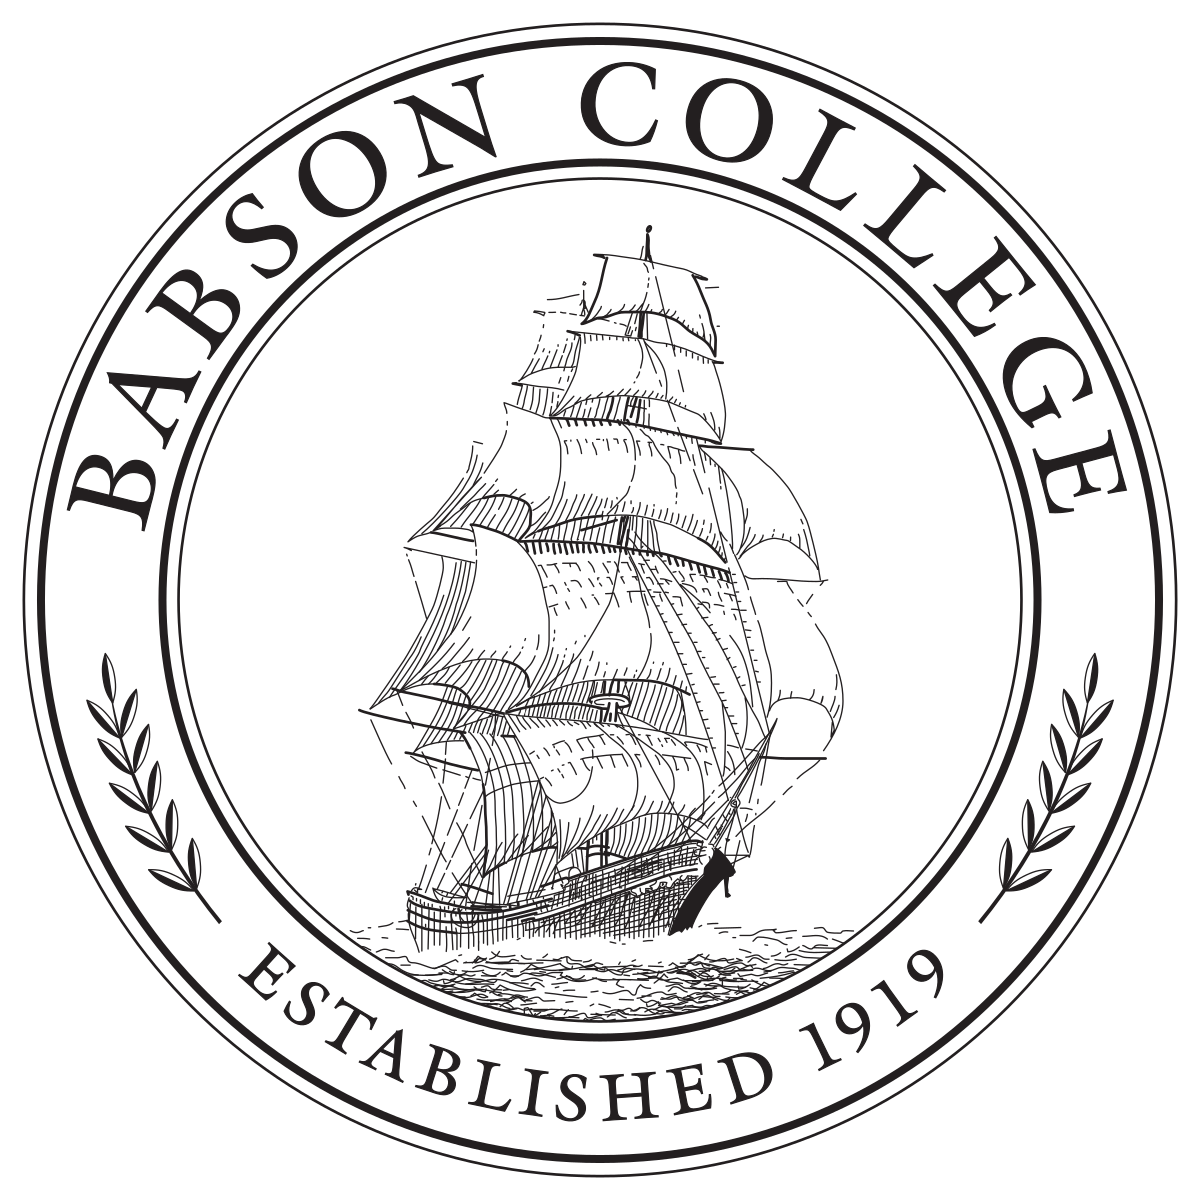 Babson College - Wikipedia